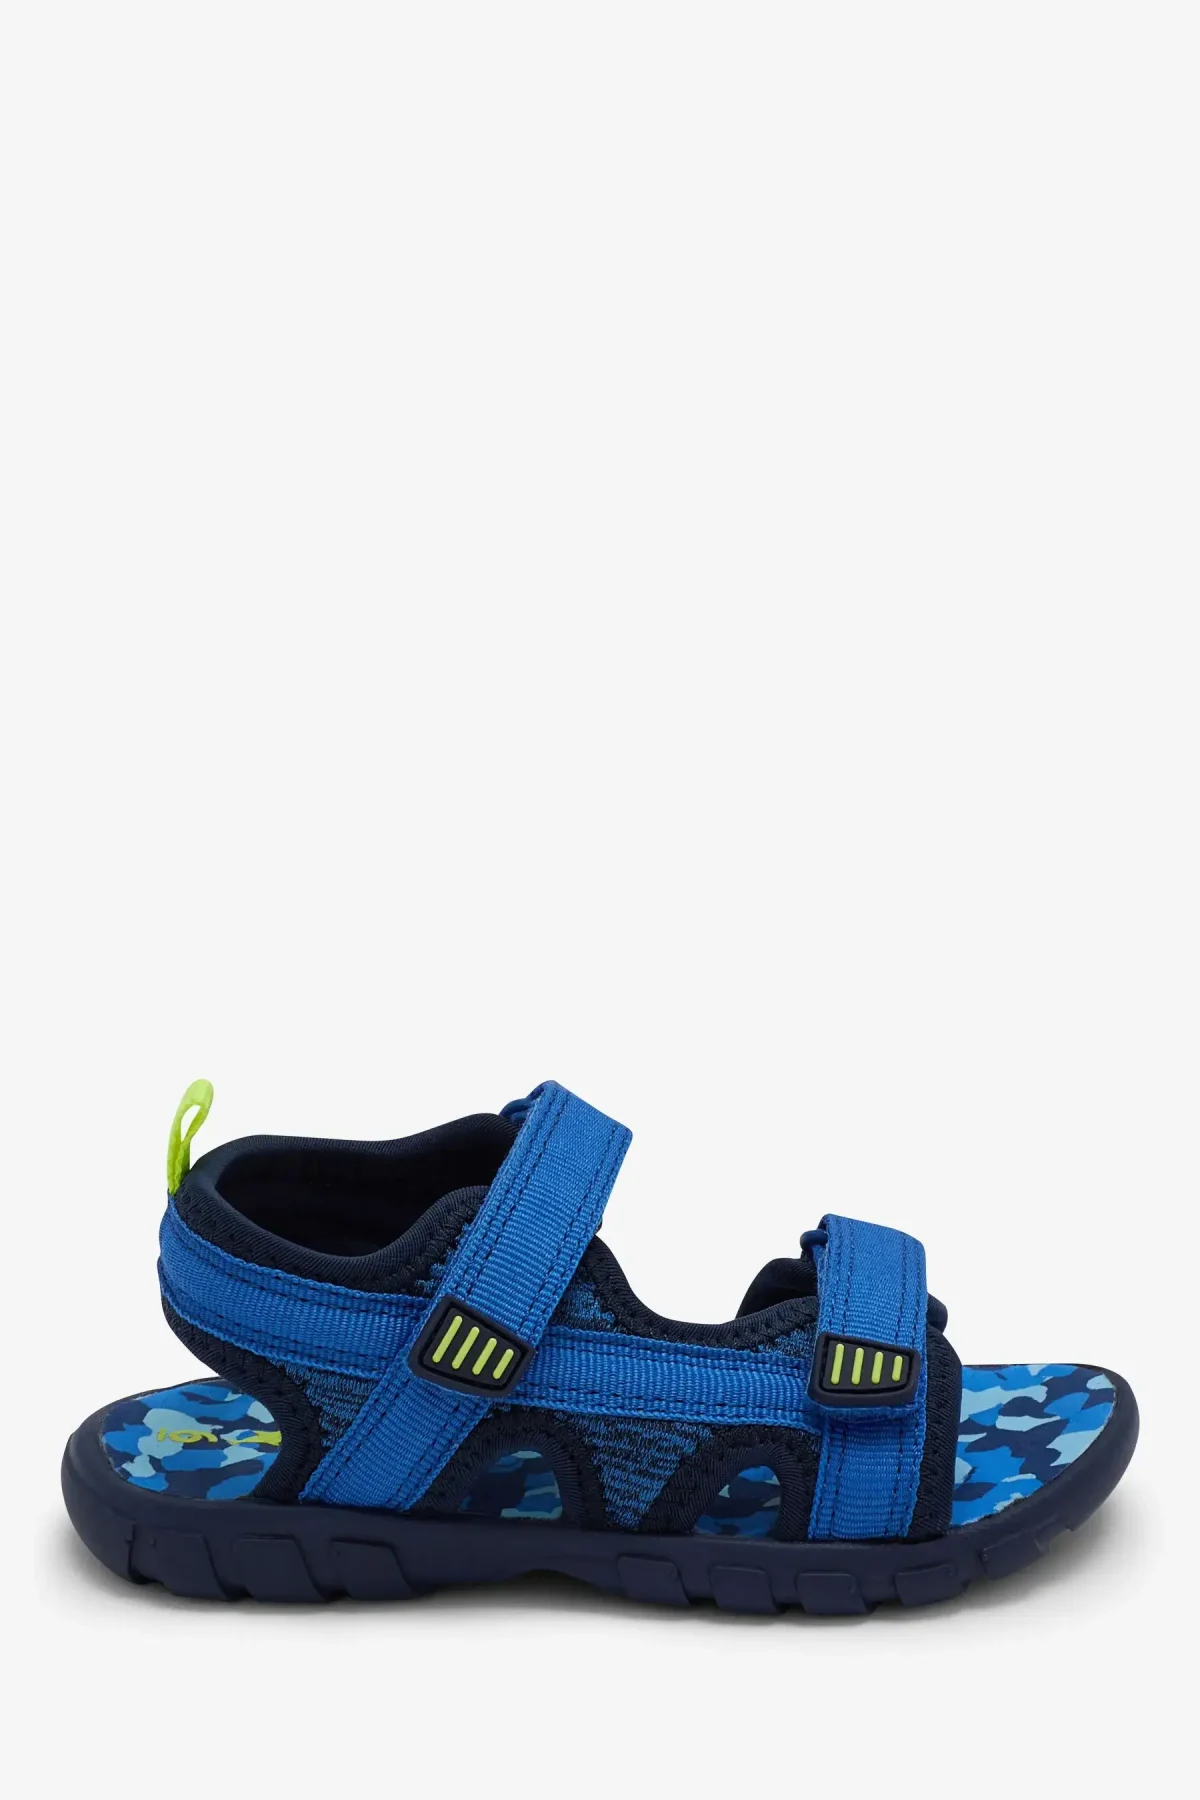 Blue sandals for boy scaled